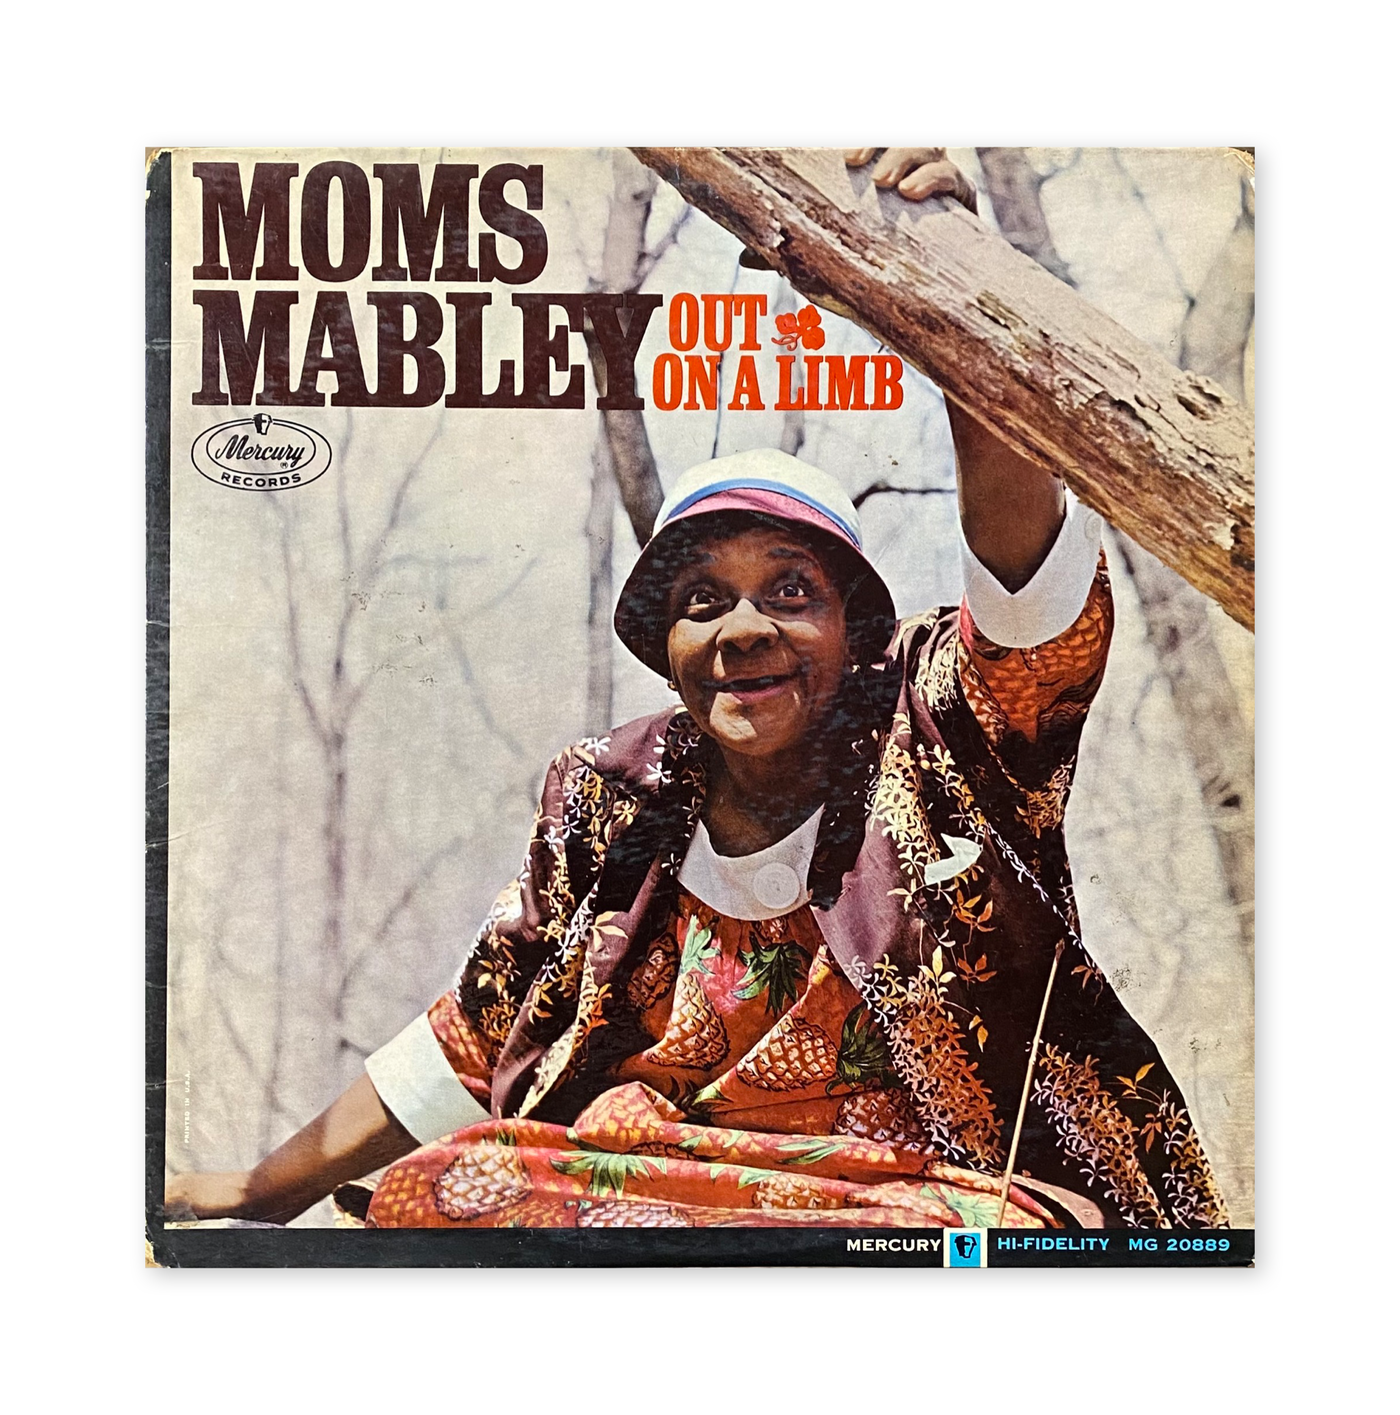 Moms Mabley - Out On A Limb